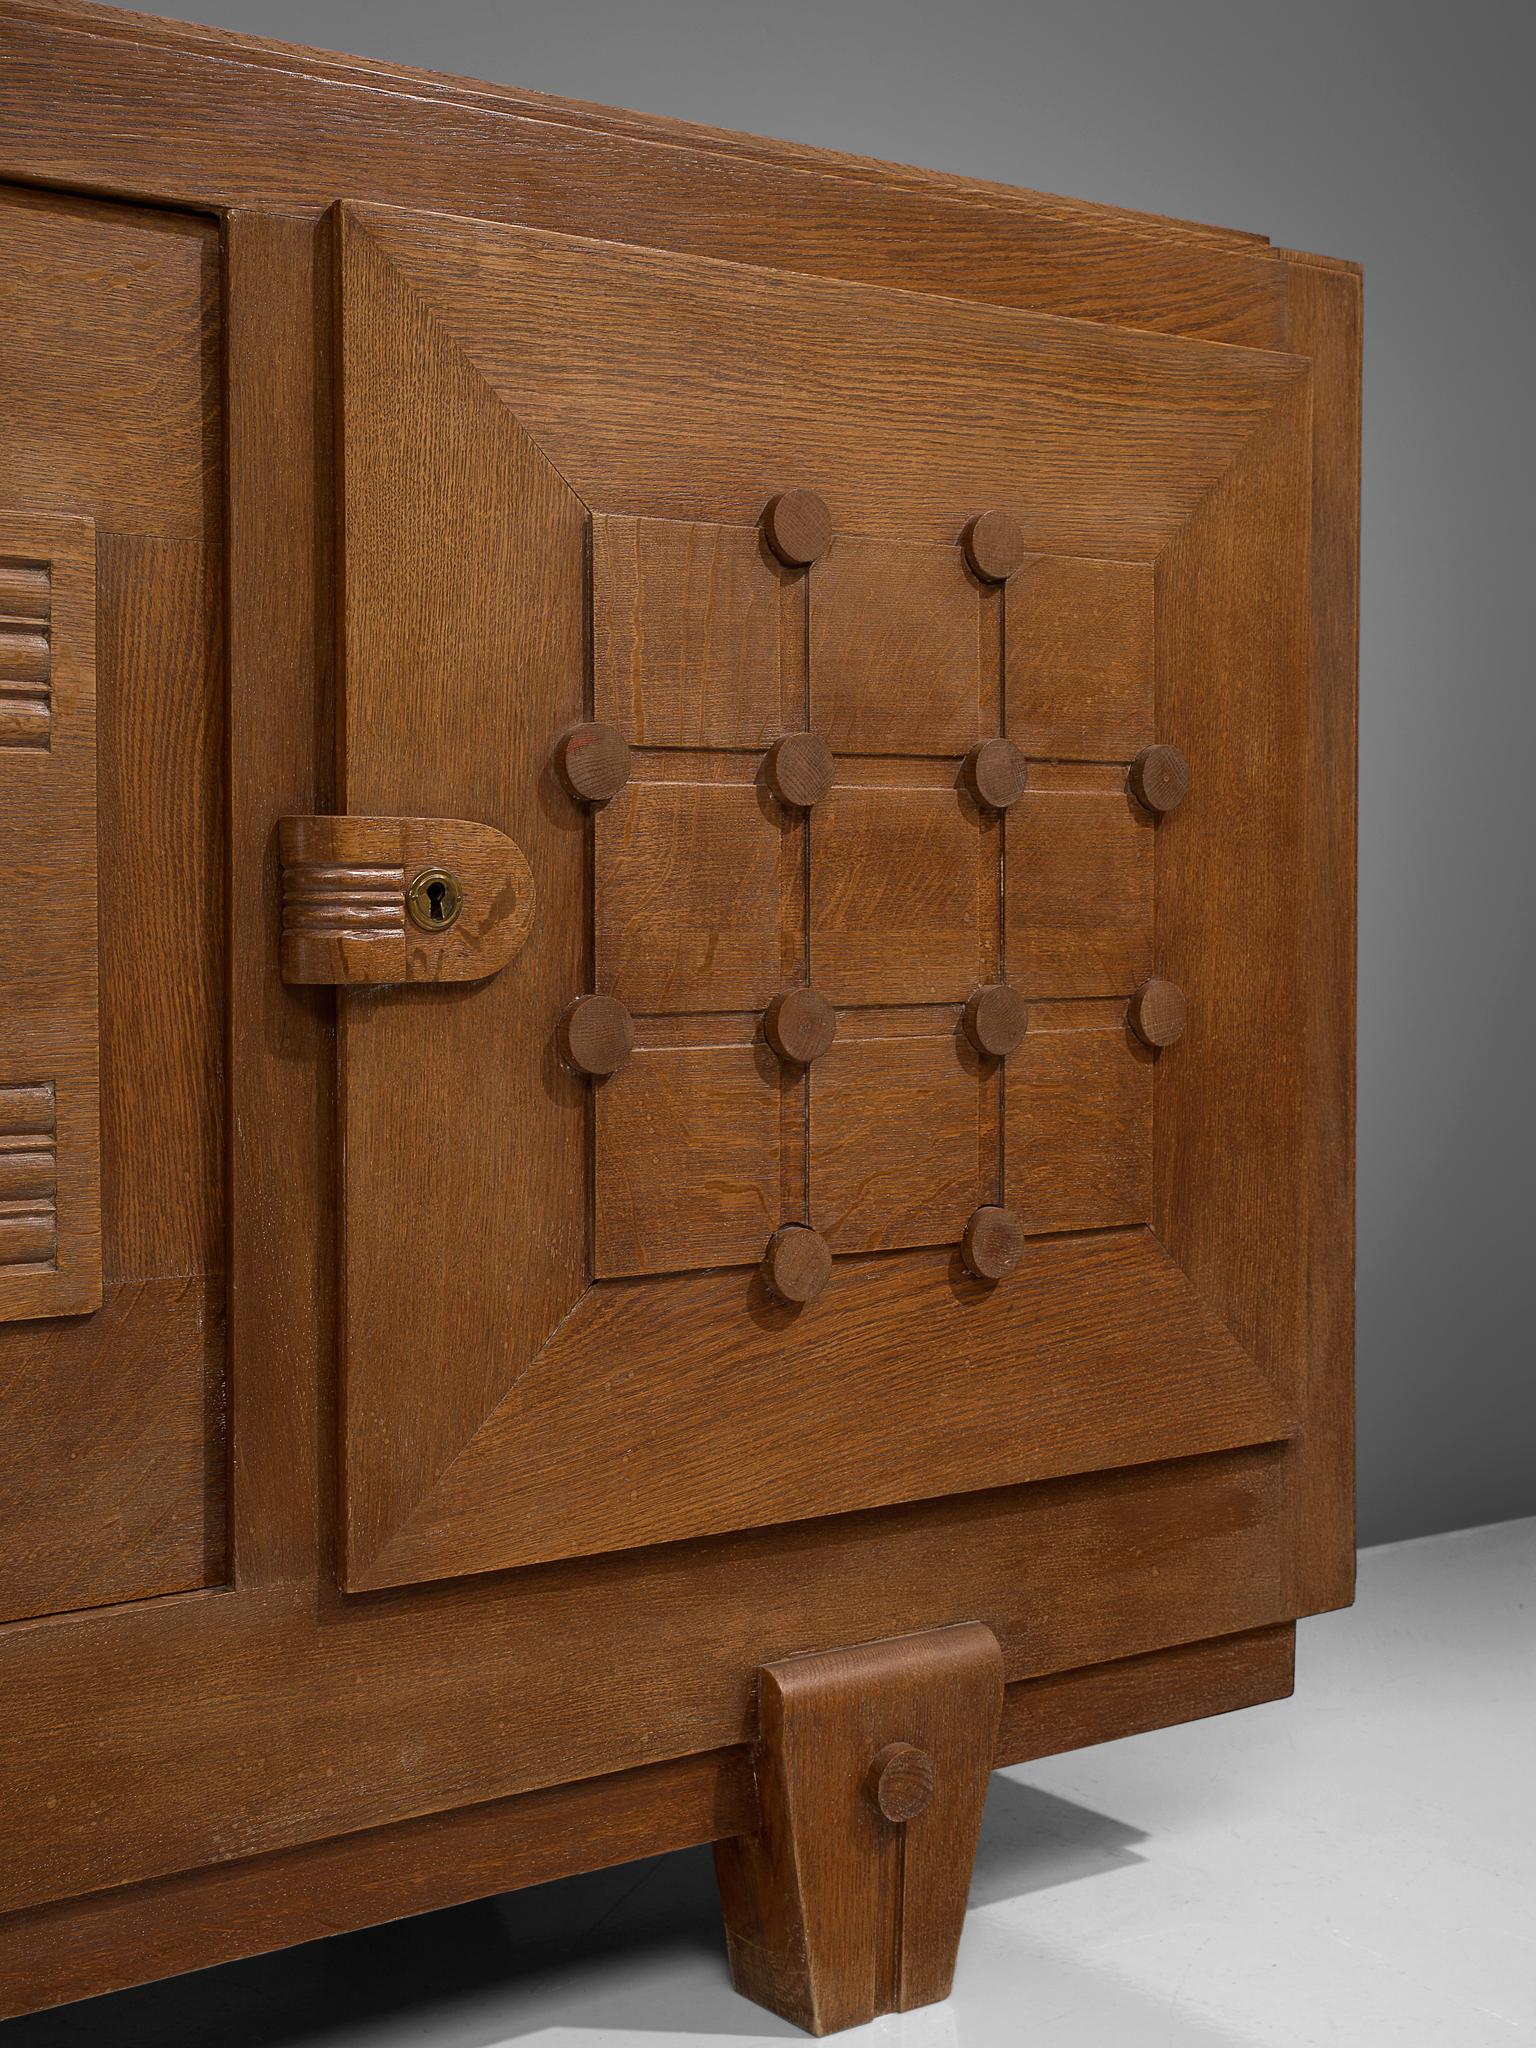 French Art Deco Credenza in Oak with Graphical Details im Zustand „Gut“ in Waalwijk, NL